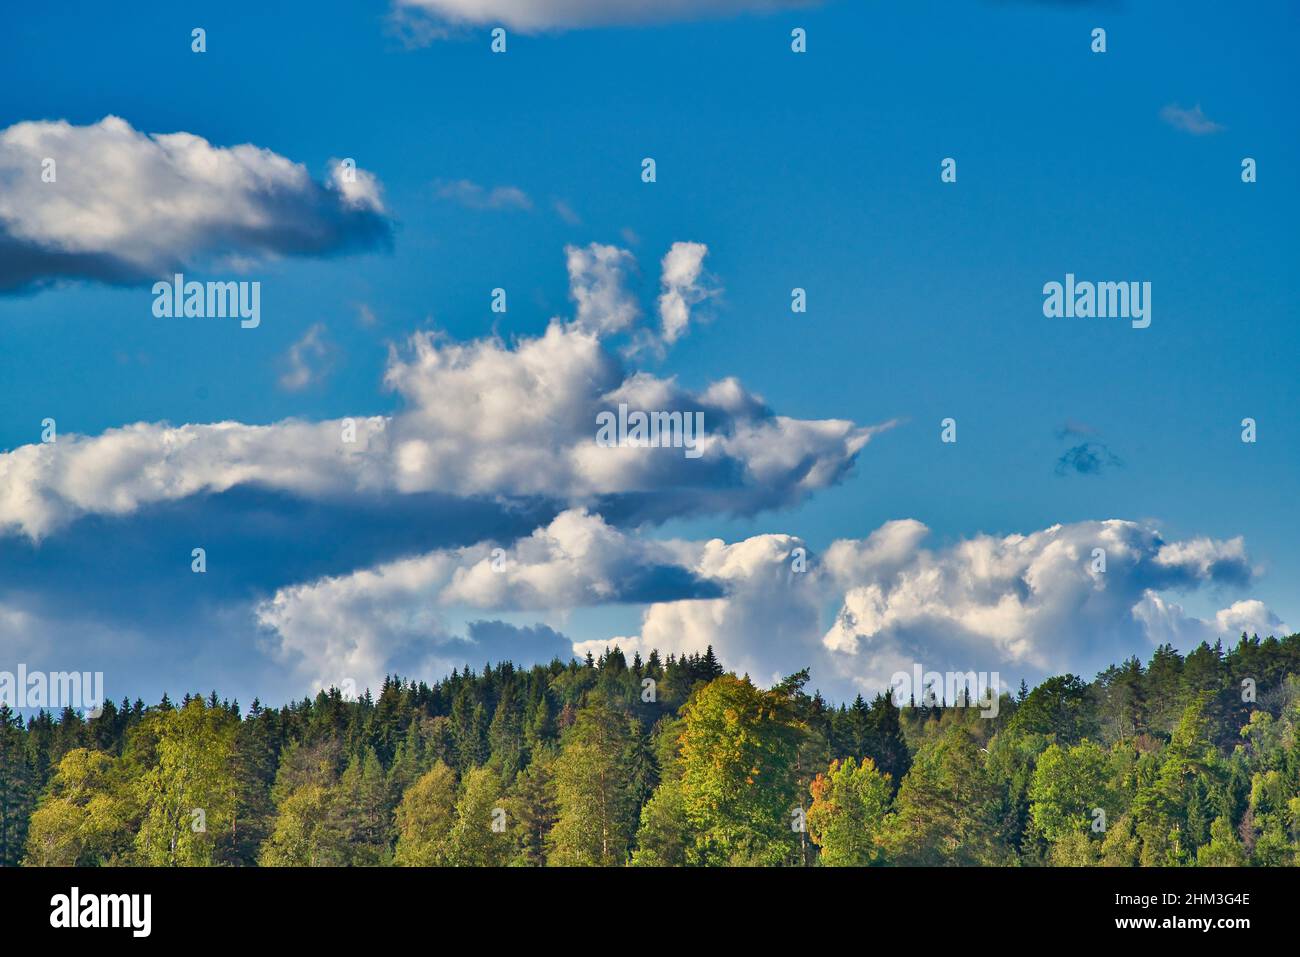 blue sky background with white Cloud look like a animal maybe rat or mouse, with forest in the foreground Stock Photo